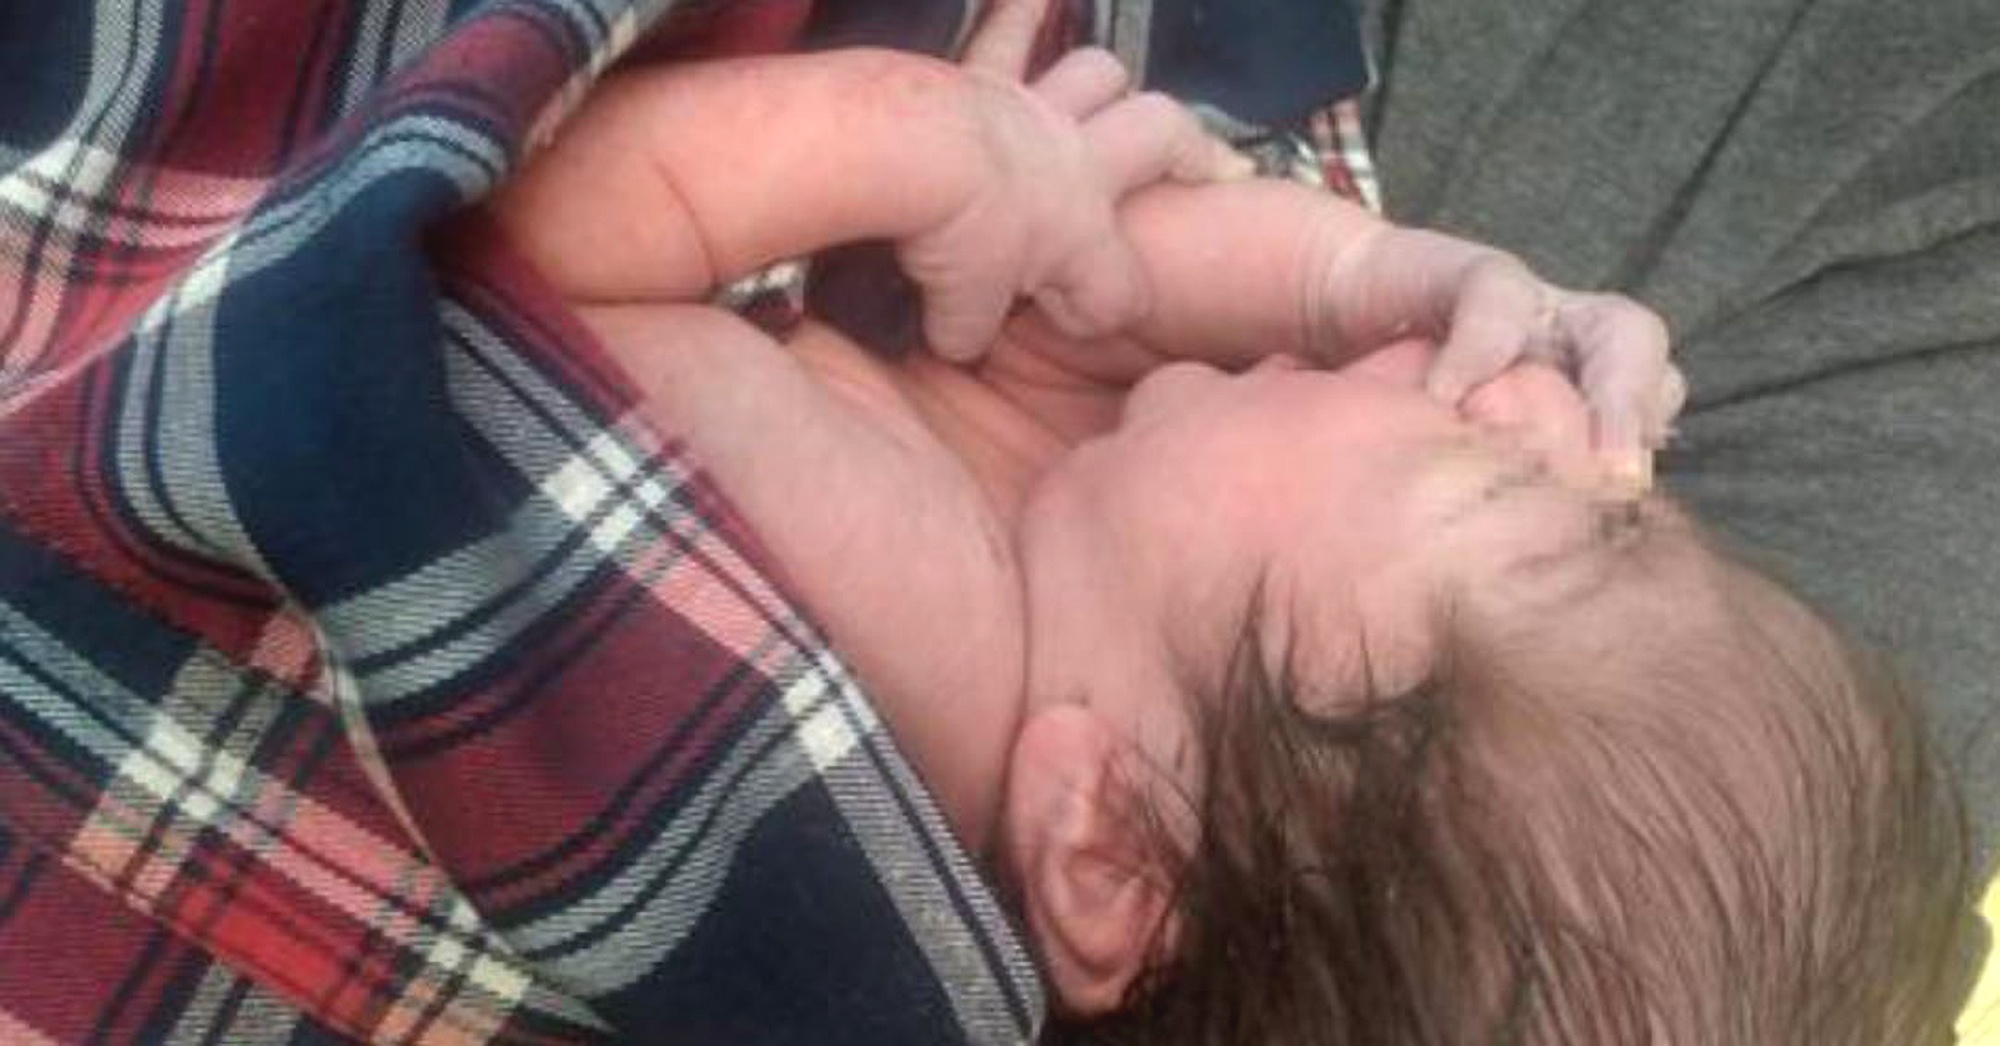 Read more about the article MEWD HAVE THOUGHT IT: Newborn Abandoned In Trash Mistaken For Kitten